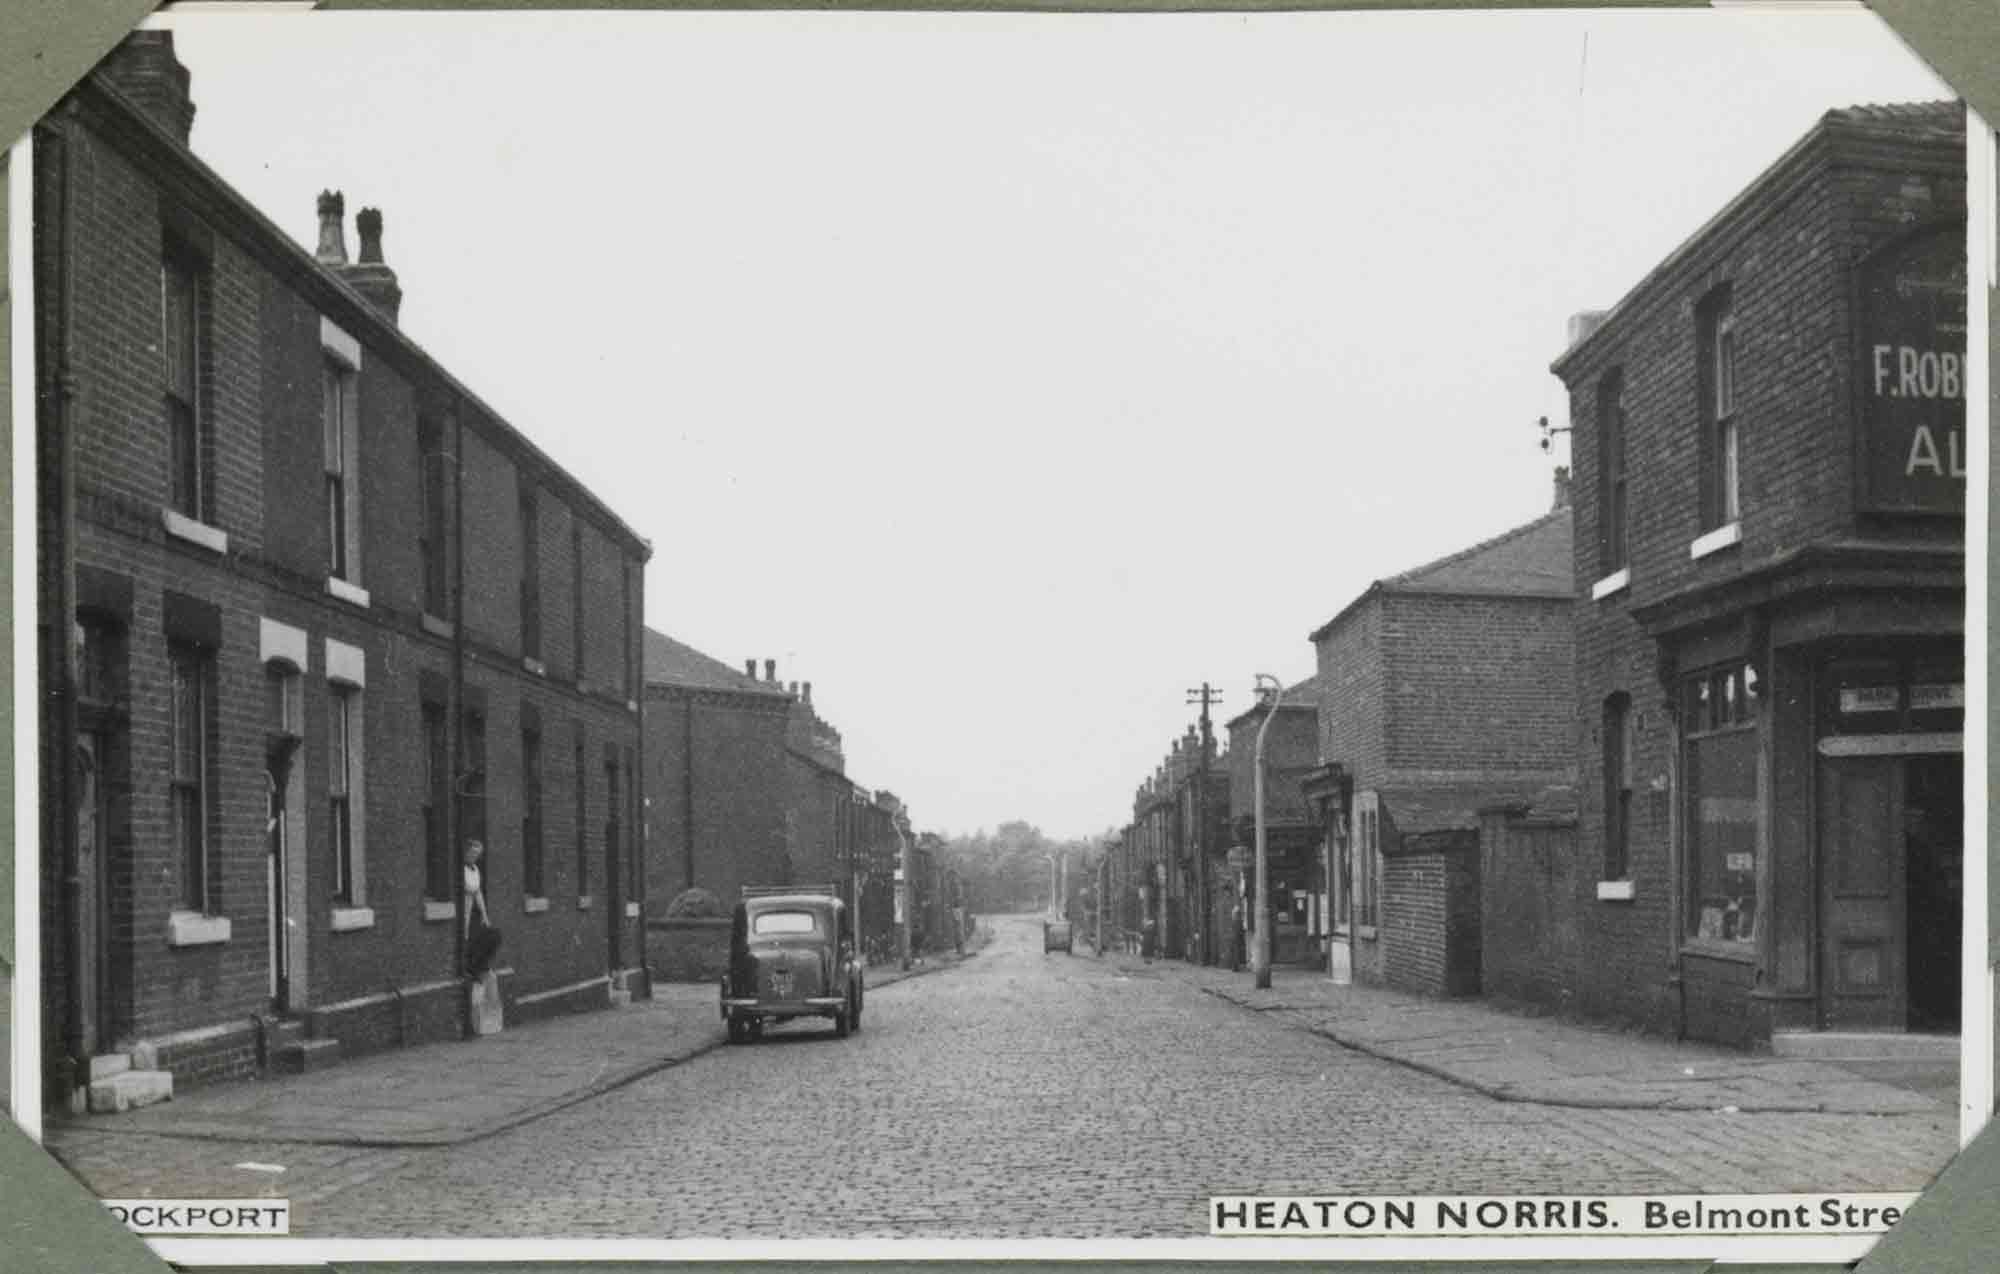 Black and white photograph of an urban street scene. The view looks straight along a cobbled road, gently sloping into the distance. The street is empty apart from a couple of parked cars and a woman on the doorstep of a brick terrace house to the left side of the street. The two-storey buildings flanking the street are mostly houses that front directly onto the pavement. On the right side, some commercial premises can be made out, the one in the foreground having a double-door corner entrance. A label applied to the bottom-right reads: 'Heaton Norris. Belmont Street' and a label applied to the bottom-left reads: 'Stockport', although they are partly obscured by corner photograph album mounts. 